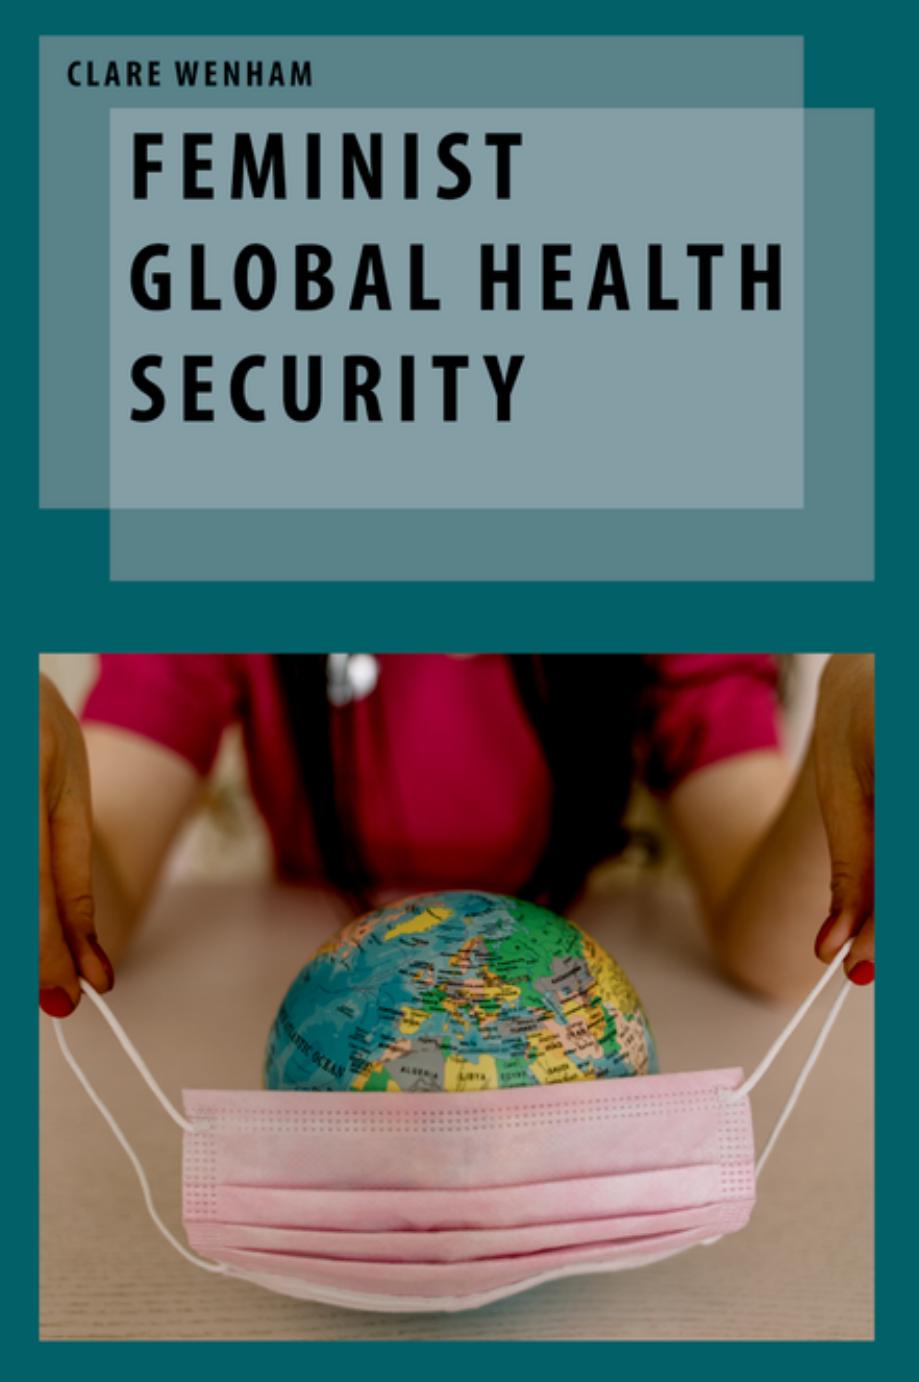 Feminist Global Health Security by Clare Wenham